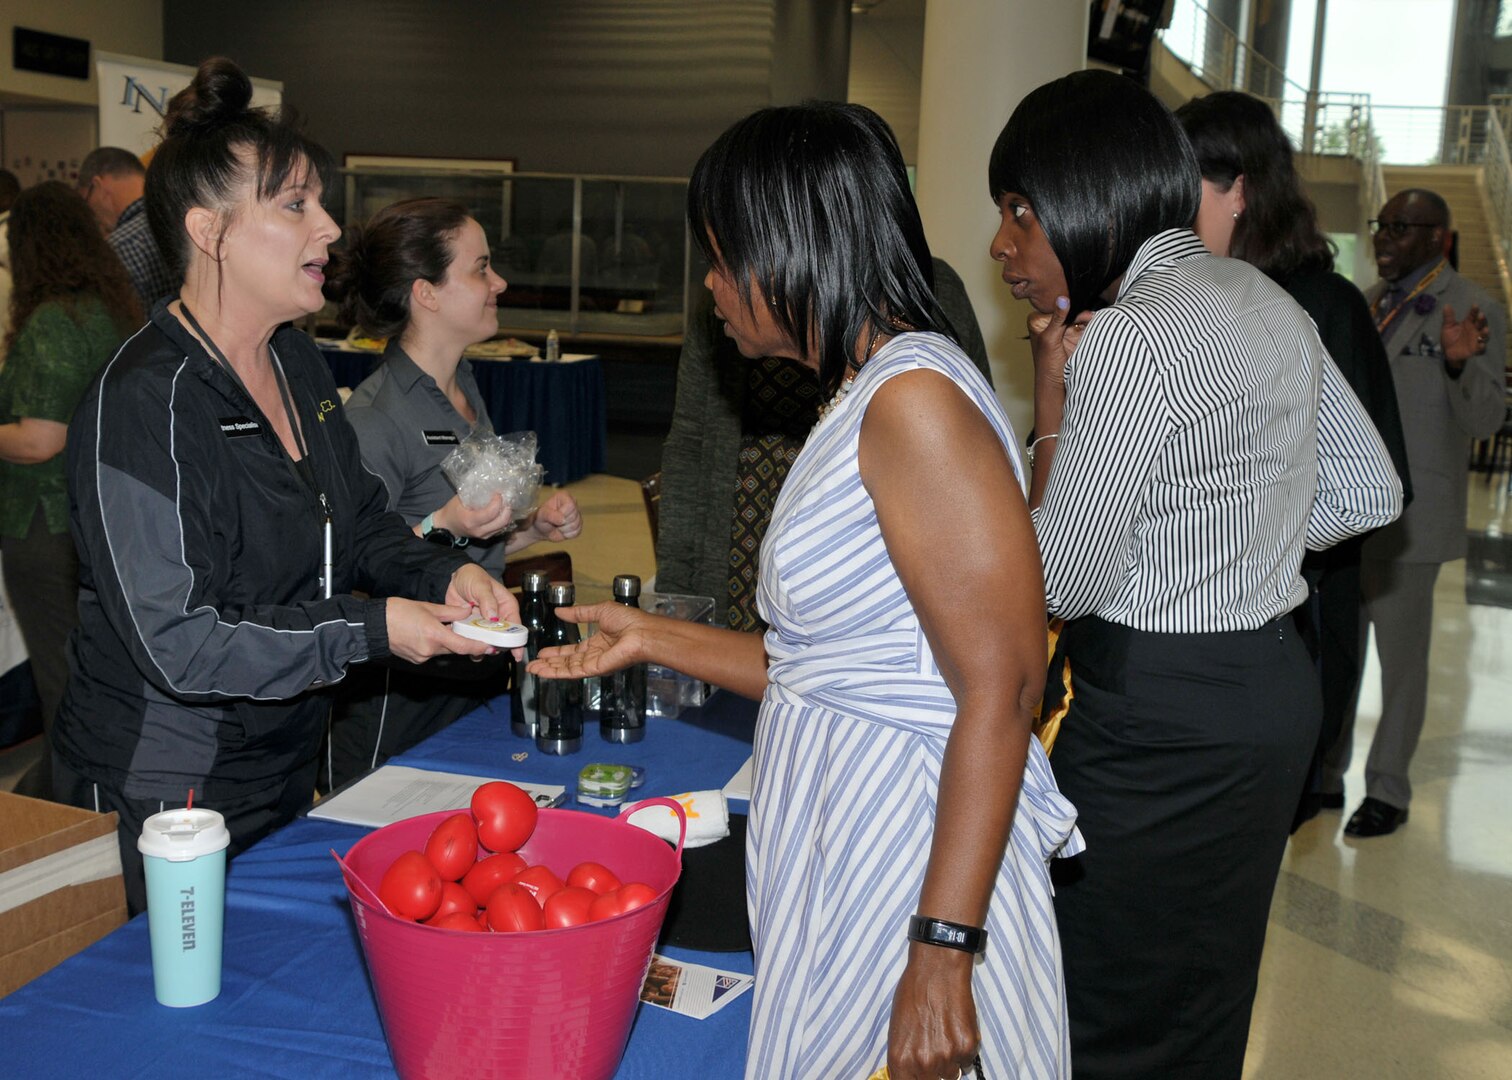 Staff from the HQC Fitness Center offer information on the facility's fitness offerings at the annual Health and Safety Expo. Photo by Teodora Mocanu